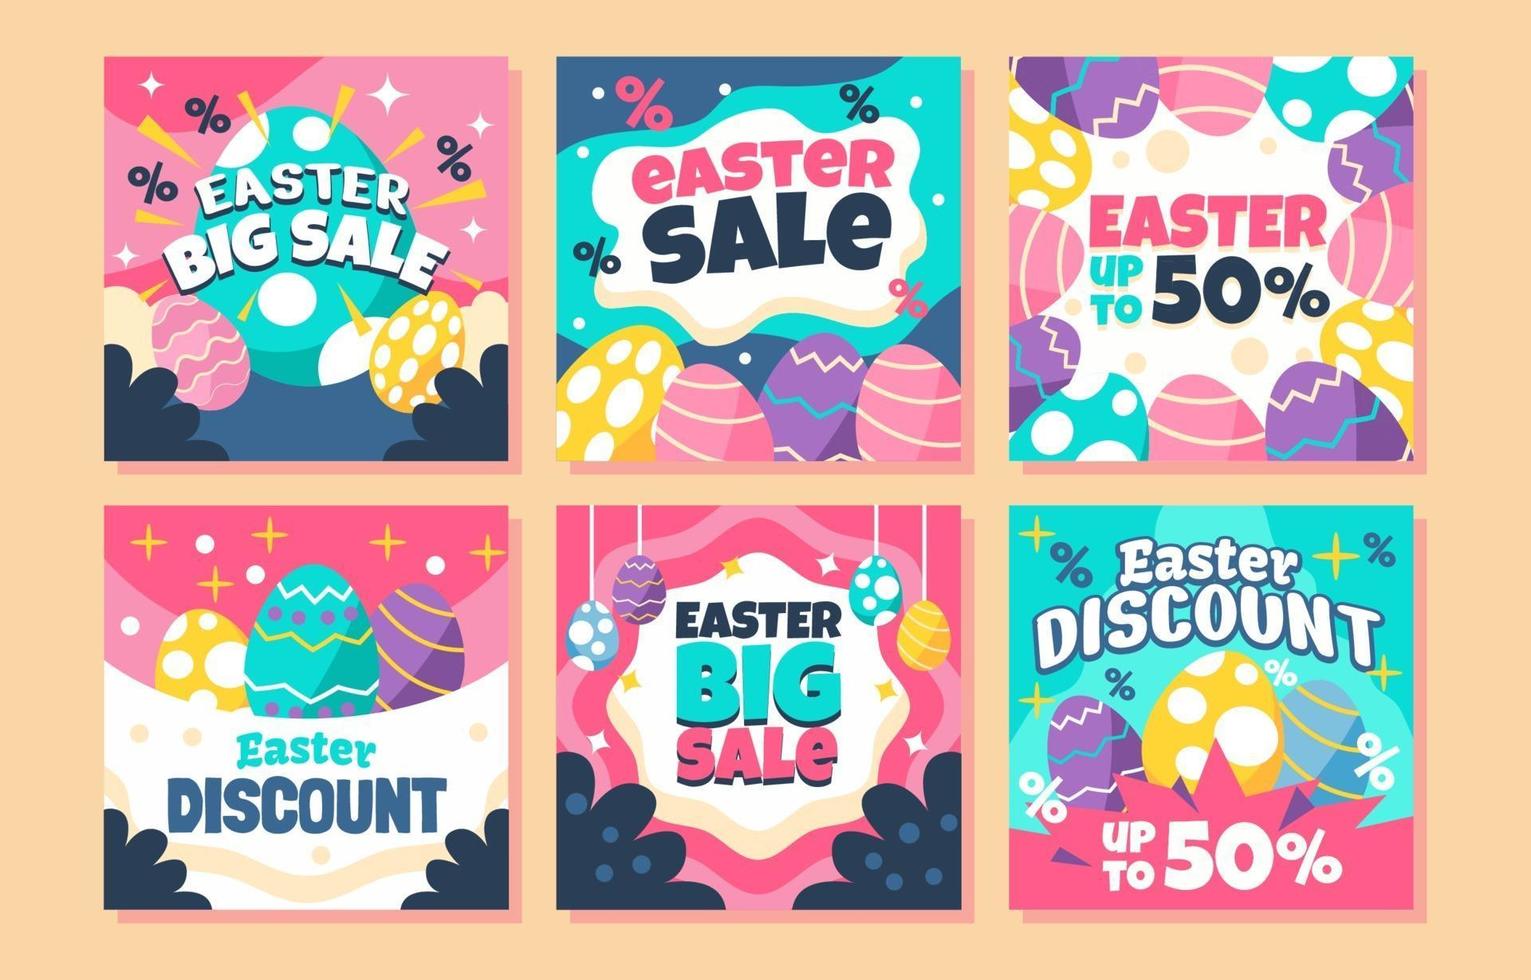 The Amazing Easter Colorful Sale vector